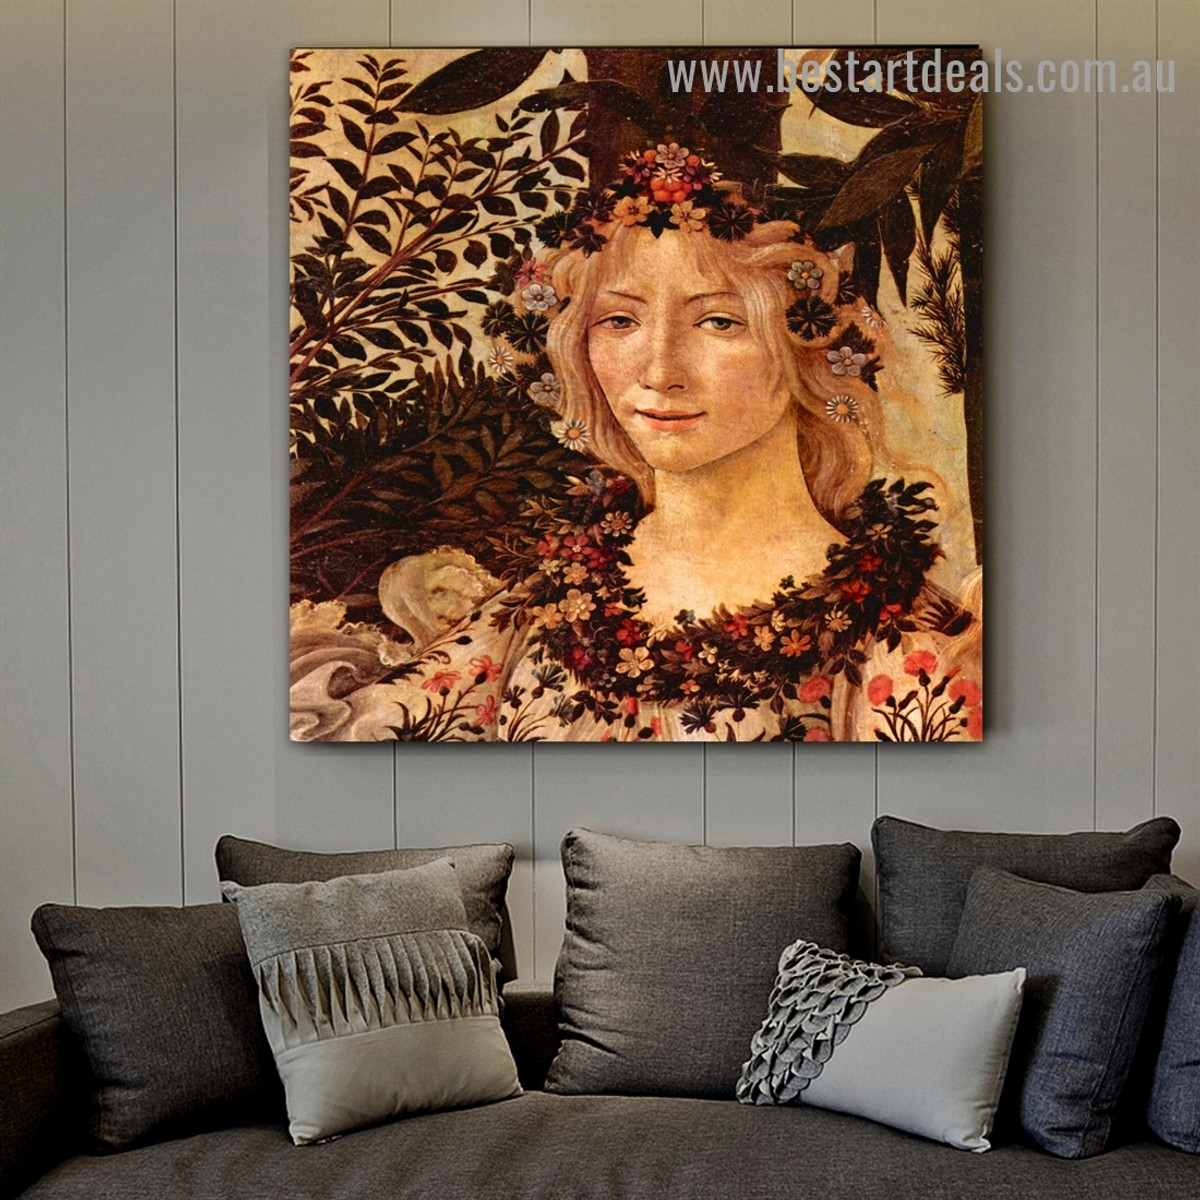 The Spring II Sandro Botticelli Botanical Figure Early Renaissance Reproduction Portrait Photo Canvas Print for Room Wall Ornament